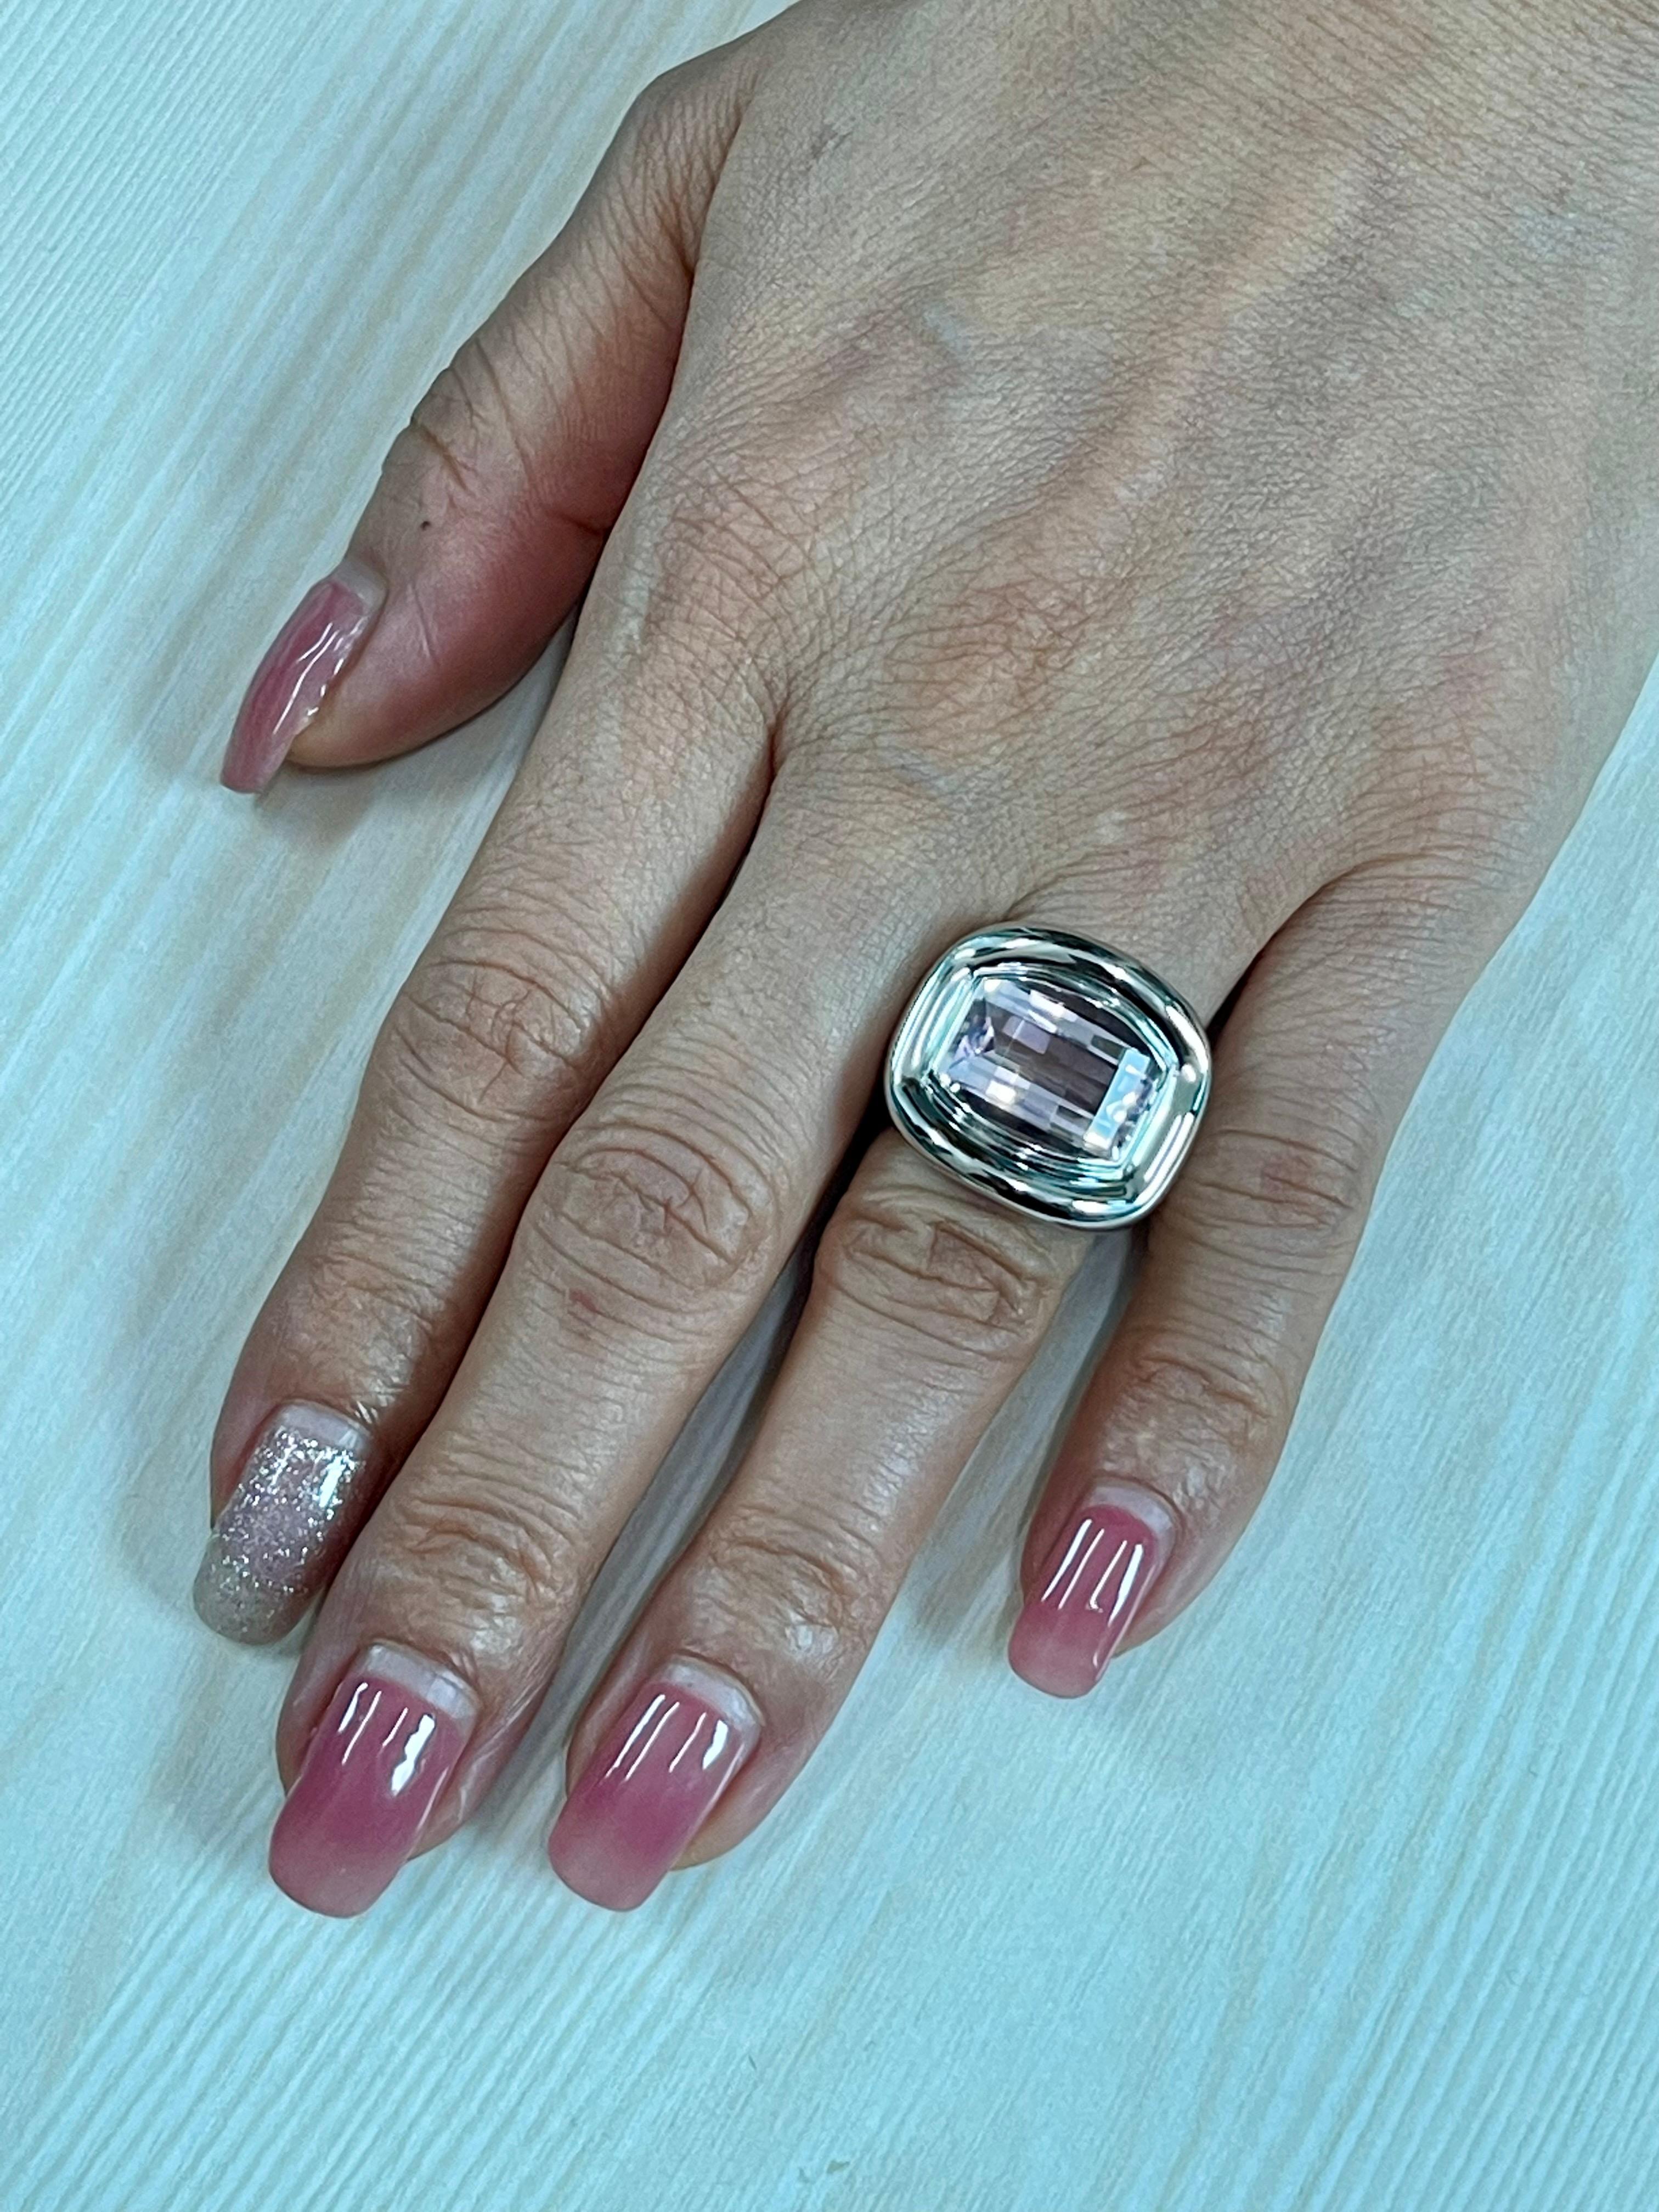 Please check out the HD video. New Old Stock. This is a unisex ring. The kunzite is a very nice light baby pink! This Kuzite statement ring will get you tons of compliments. The center stone is about 7.17cts. The ring is set in solid 18k white gold.